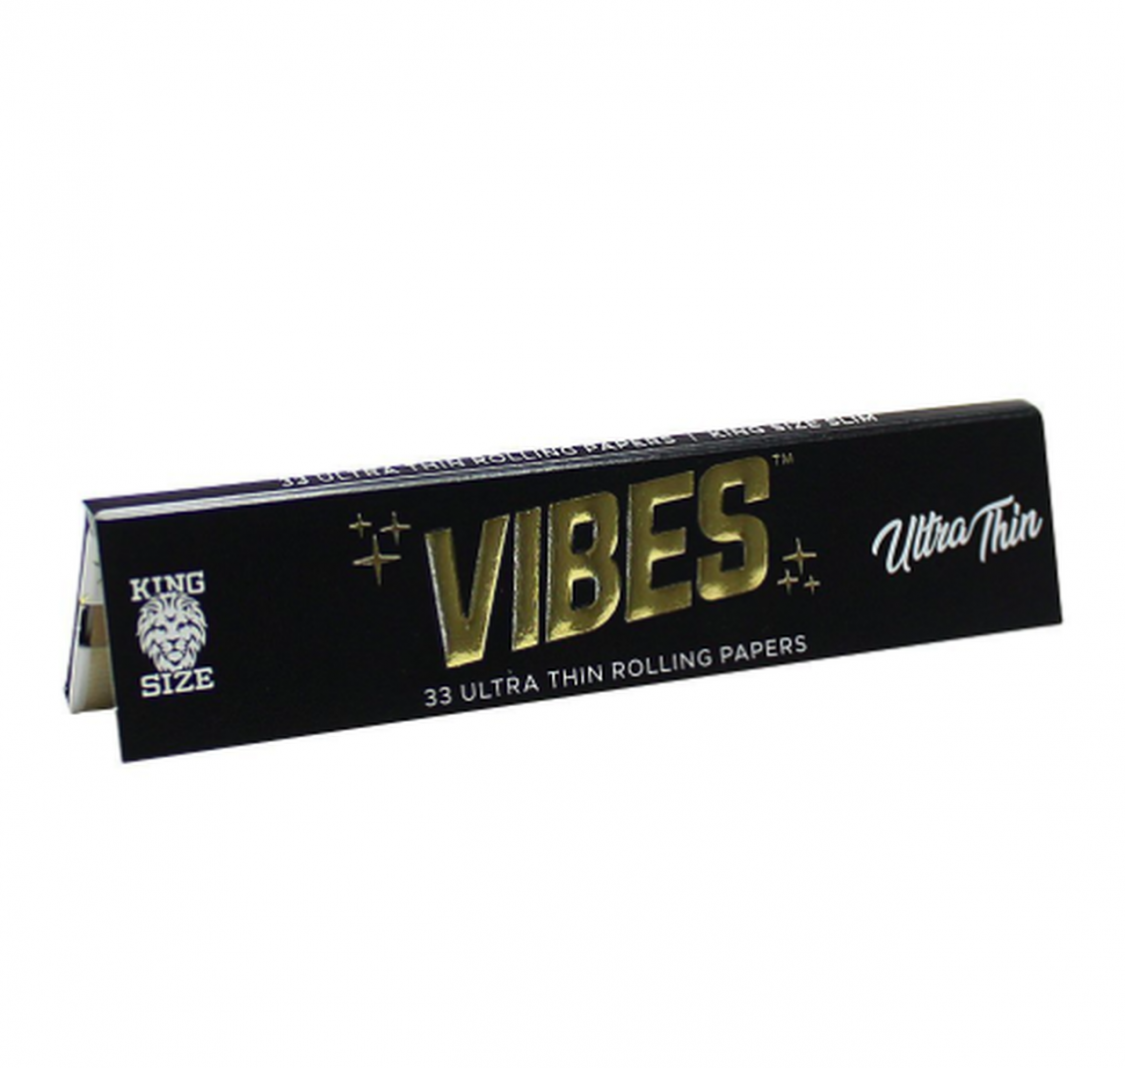 VIBES Vibes Ultra Thin 1 1/4 (black pack) Accessories Paper / Rolling Supplies